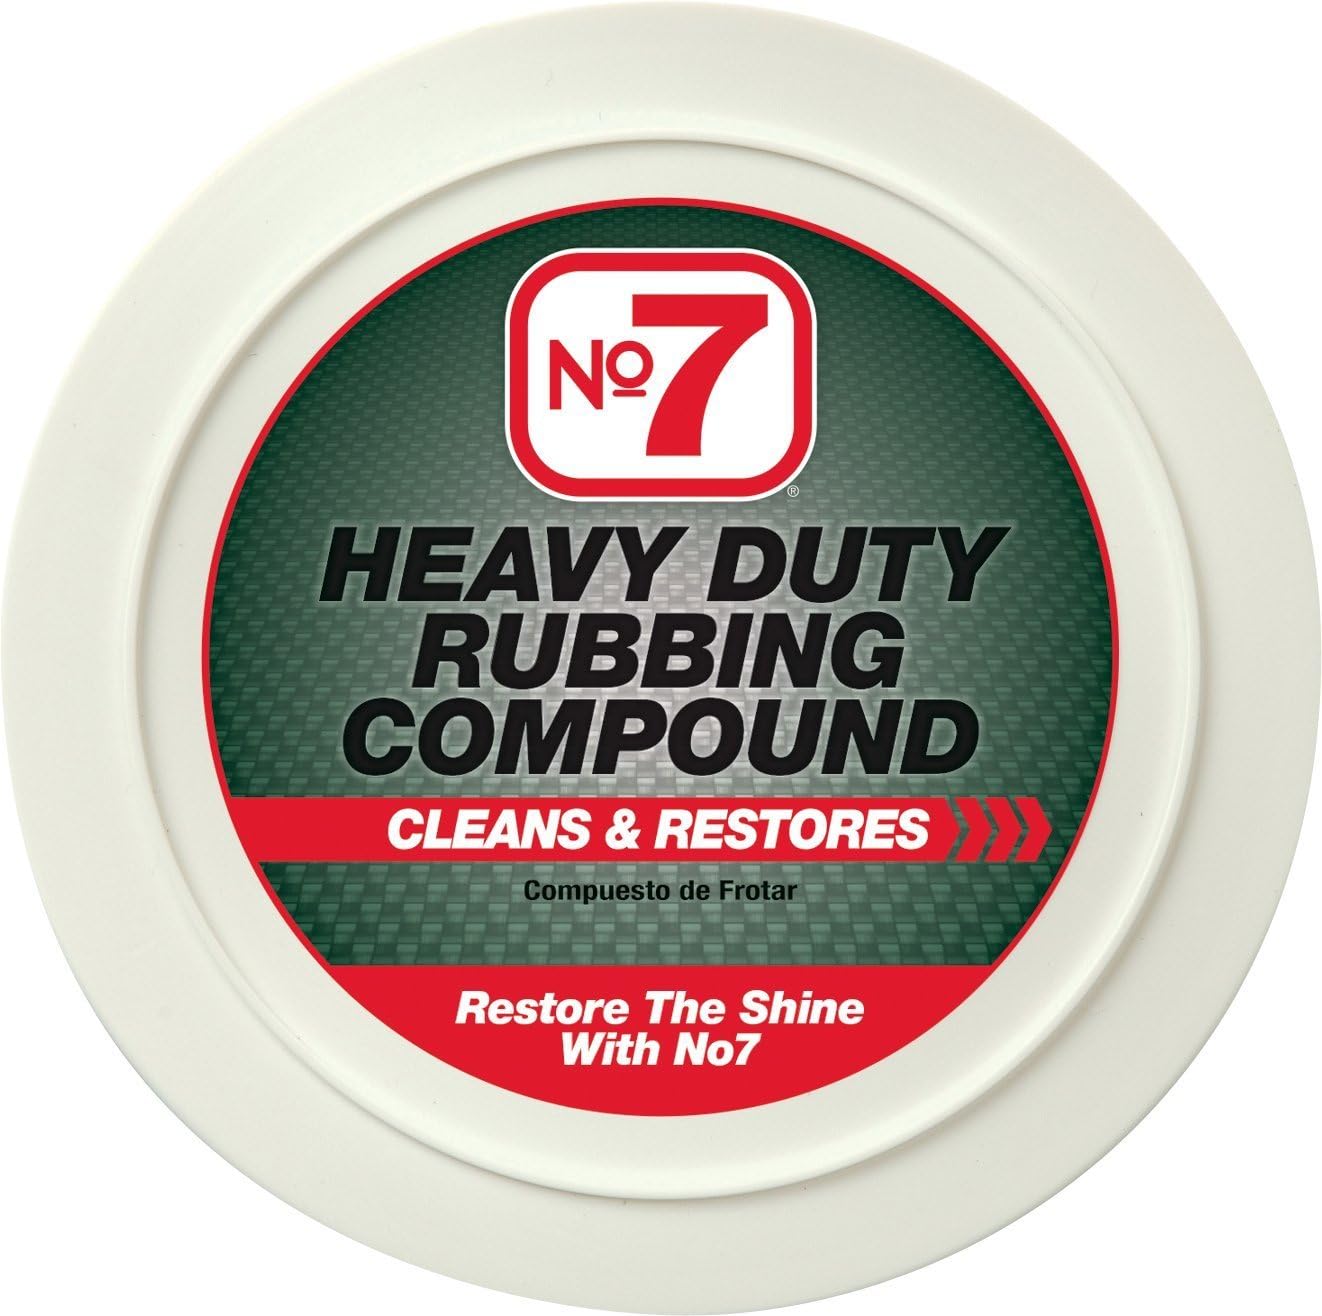 Generic No.7 Heavy Duty Rubbing Compound - 10 Fl Oz - Cleans and Restores - Removes Deep Scratches and Stains - Restores Shine to Dull